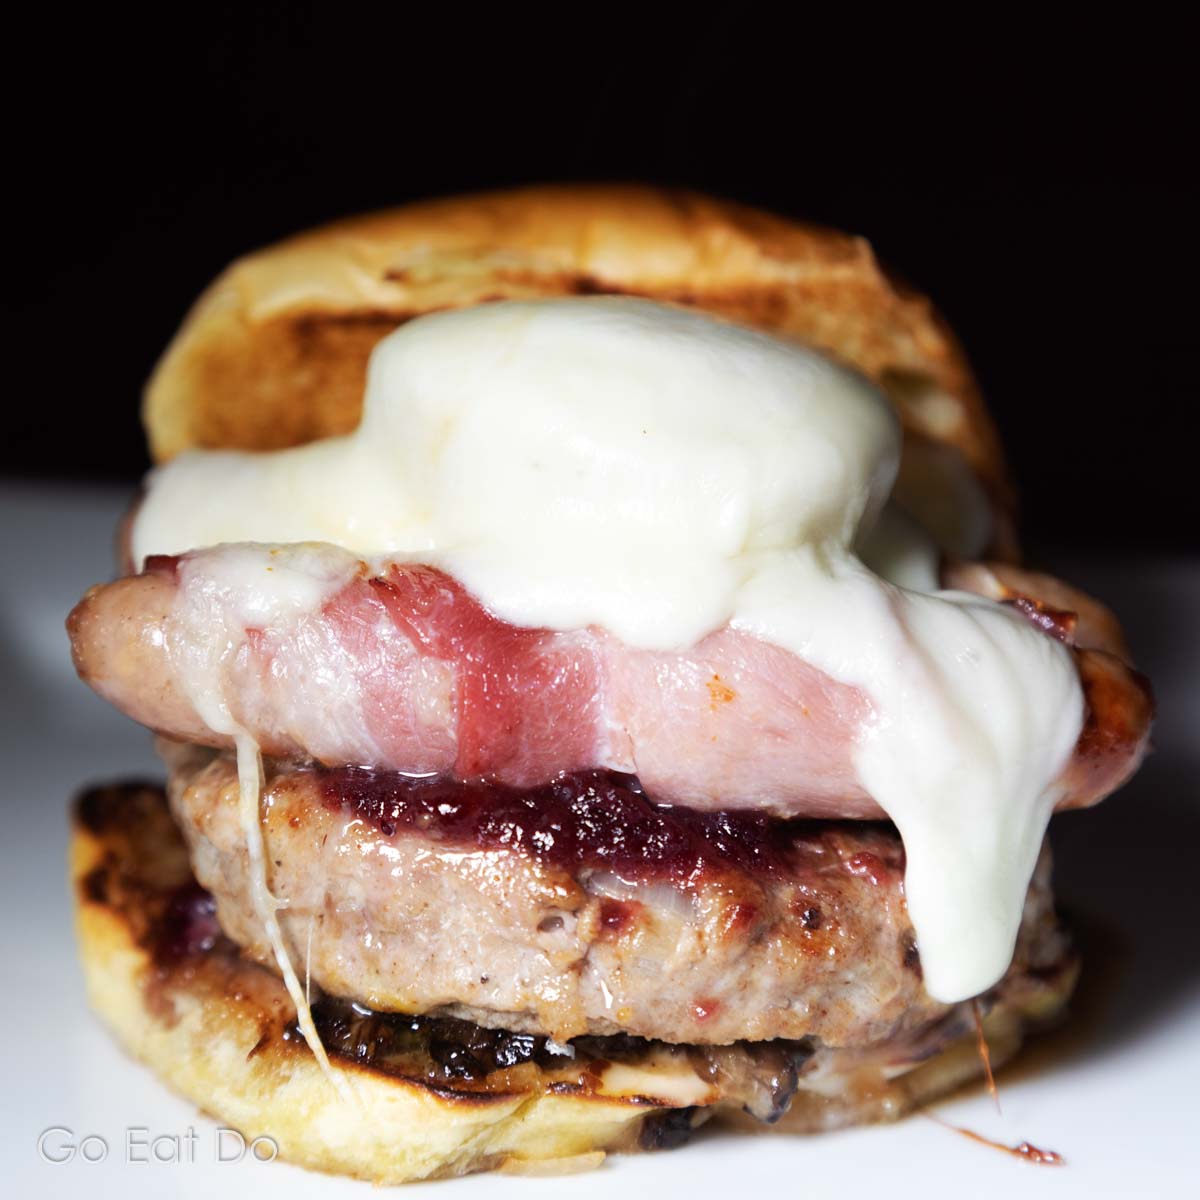 Christmas burger made with a turkey burger, cranberry sauce and pigs in blankets in a toasted brioche bun.